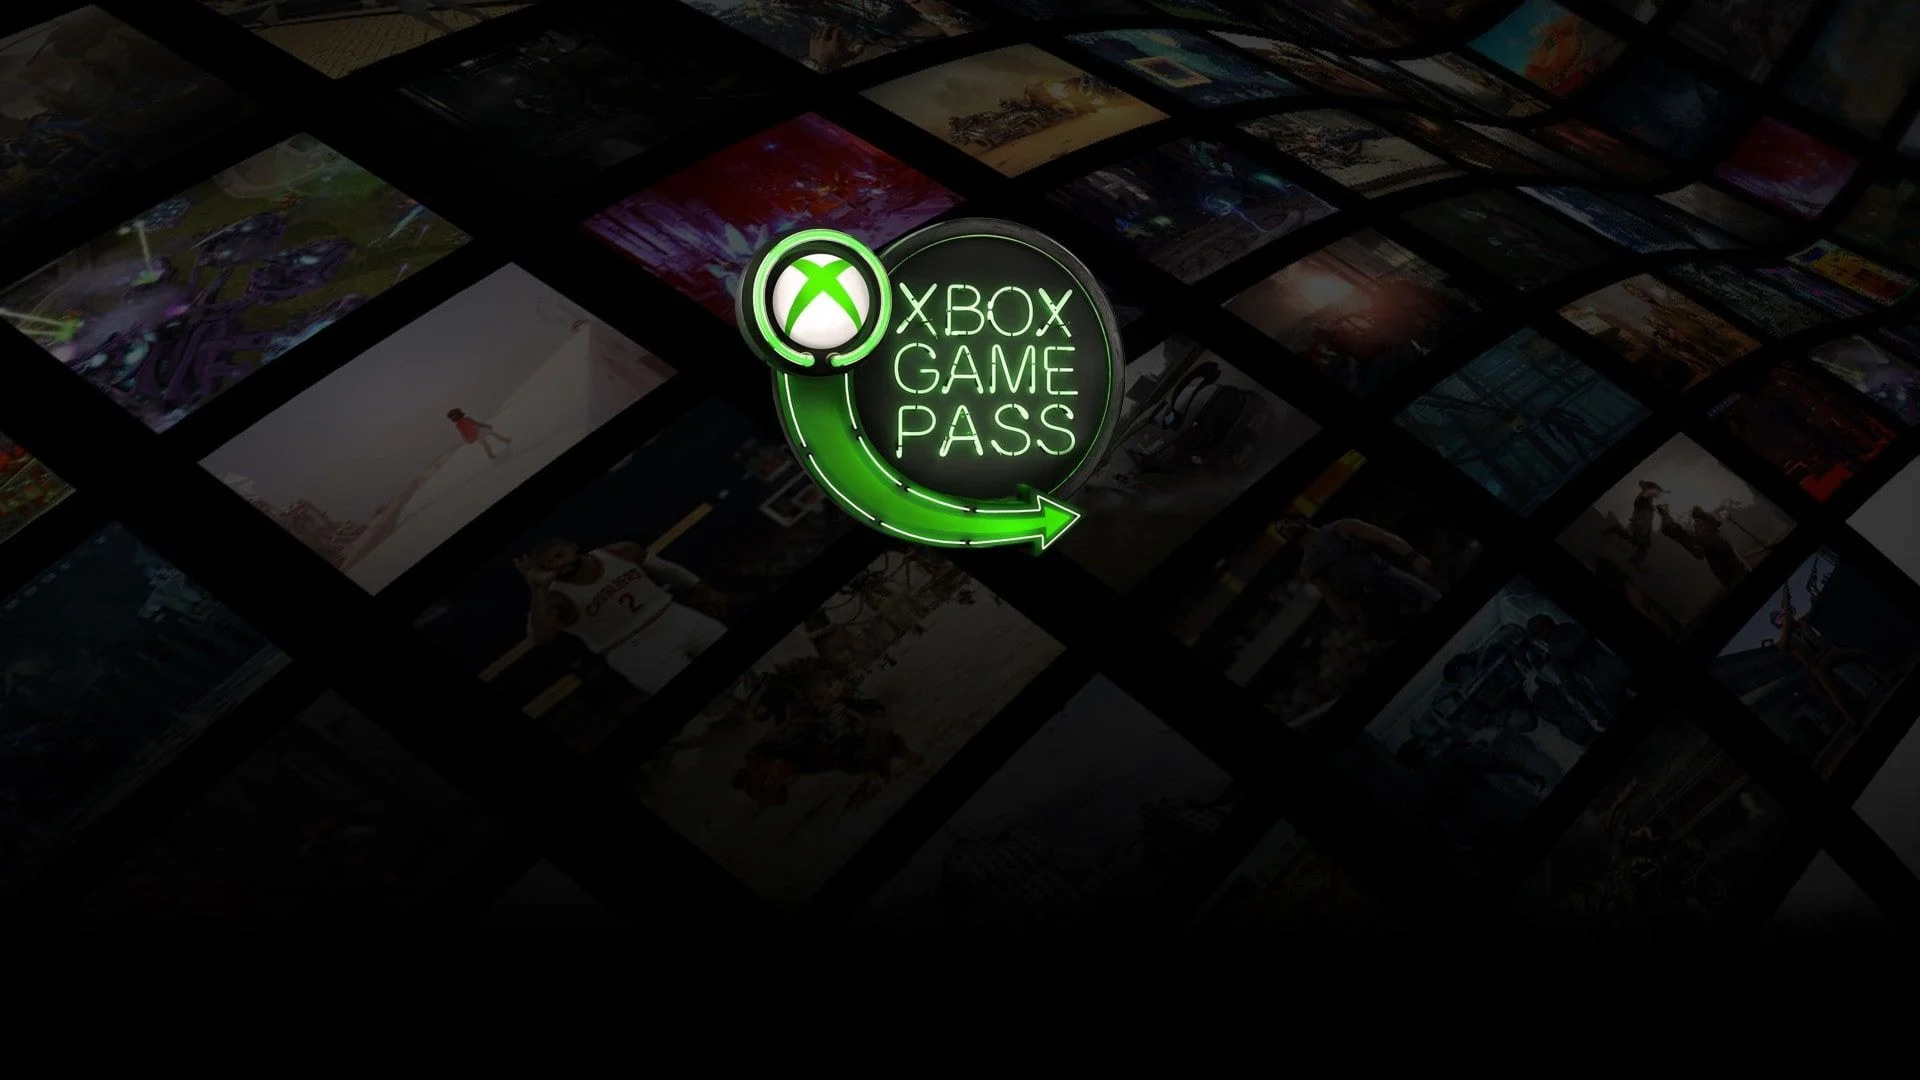 Xbox Game Pass Ultimate: Xbox Live and Xbox Game Pass for $14.99 a month -  The Verge